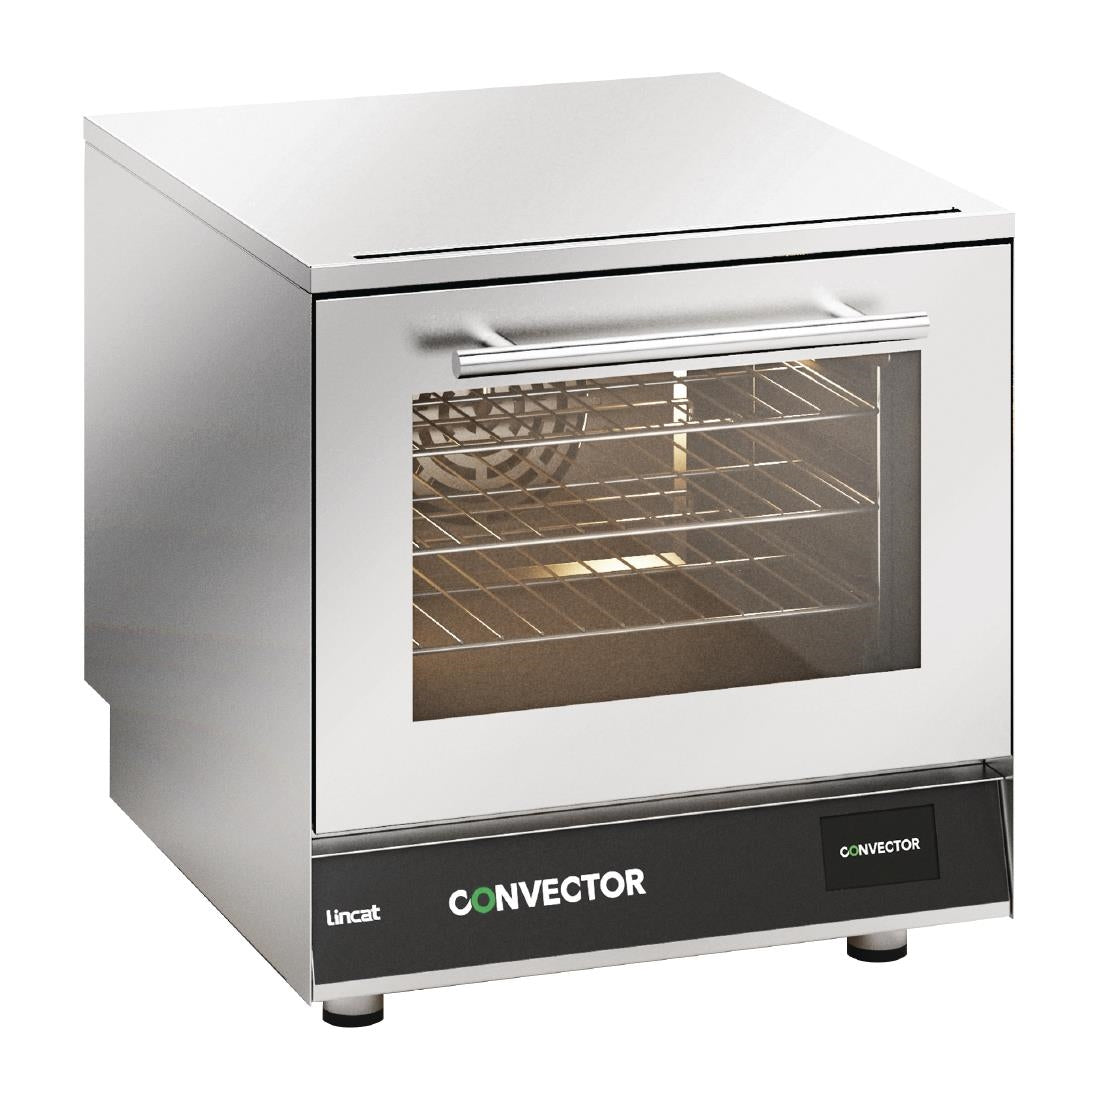 FB441 Lincat Convector Touch Electric Counter-top Convection Oven - W 610 mm - D 750 mm - 3.0 kW CO133T